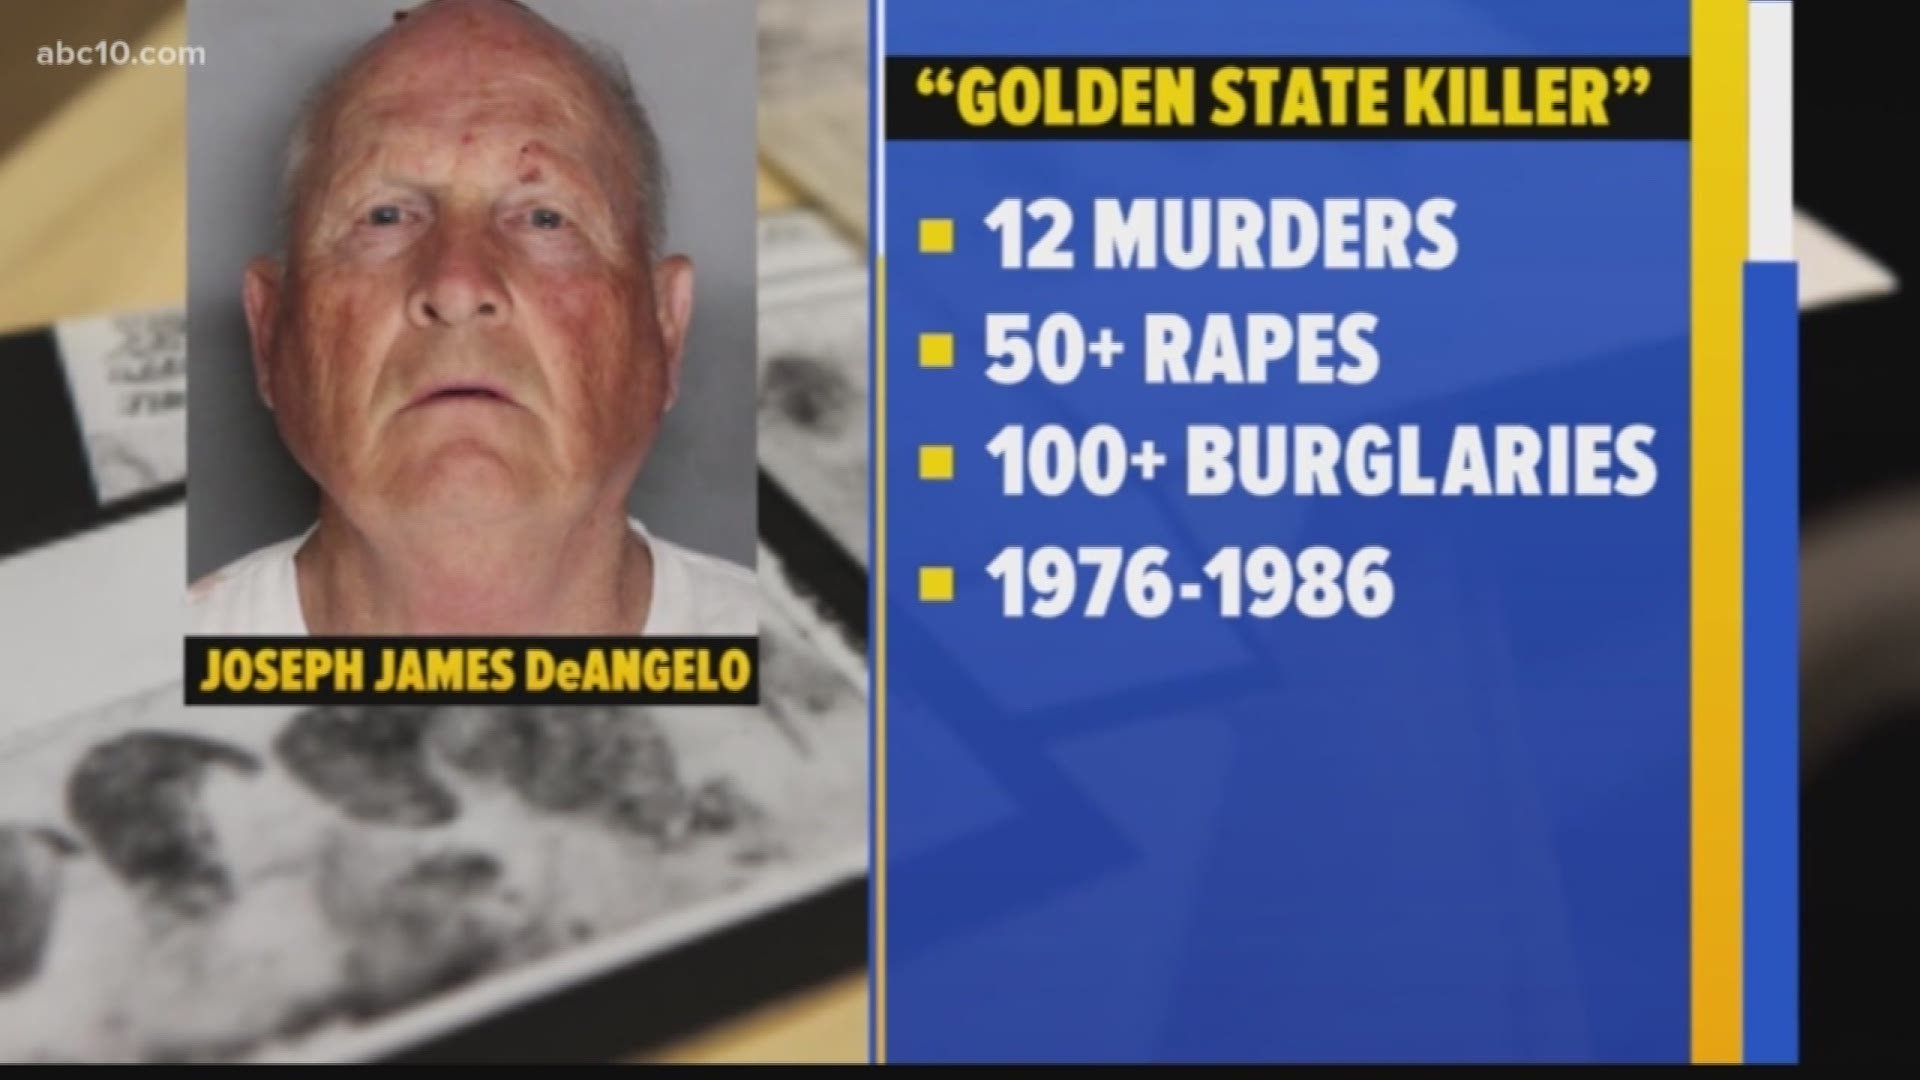 Joseph James DeAngelo, 72, is being held in the Sacramento County Jail on multiple counts of suspicion of murder. (April 26, 2018)